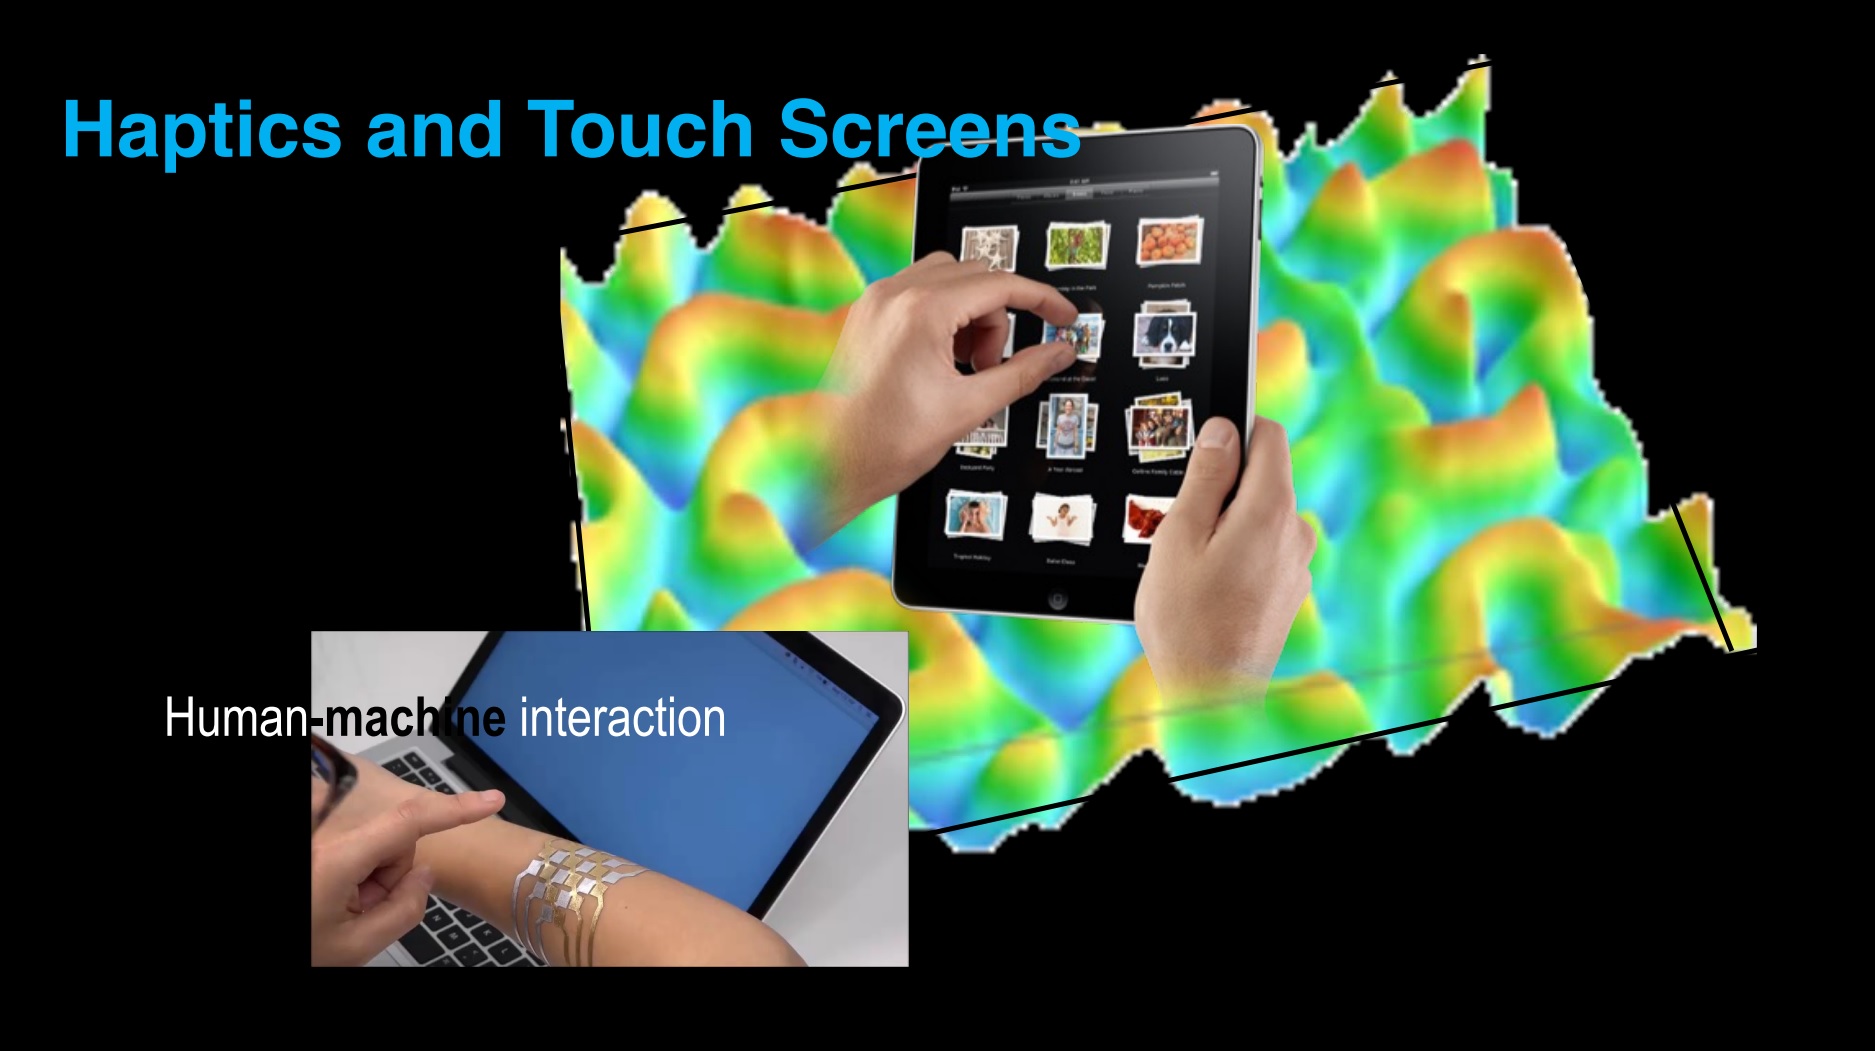 Haptics and Touch Screens